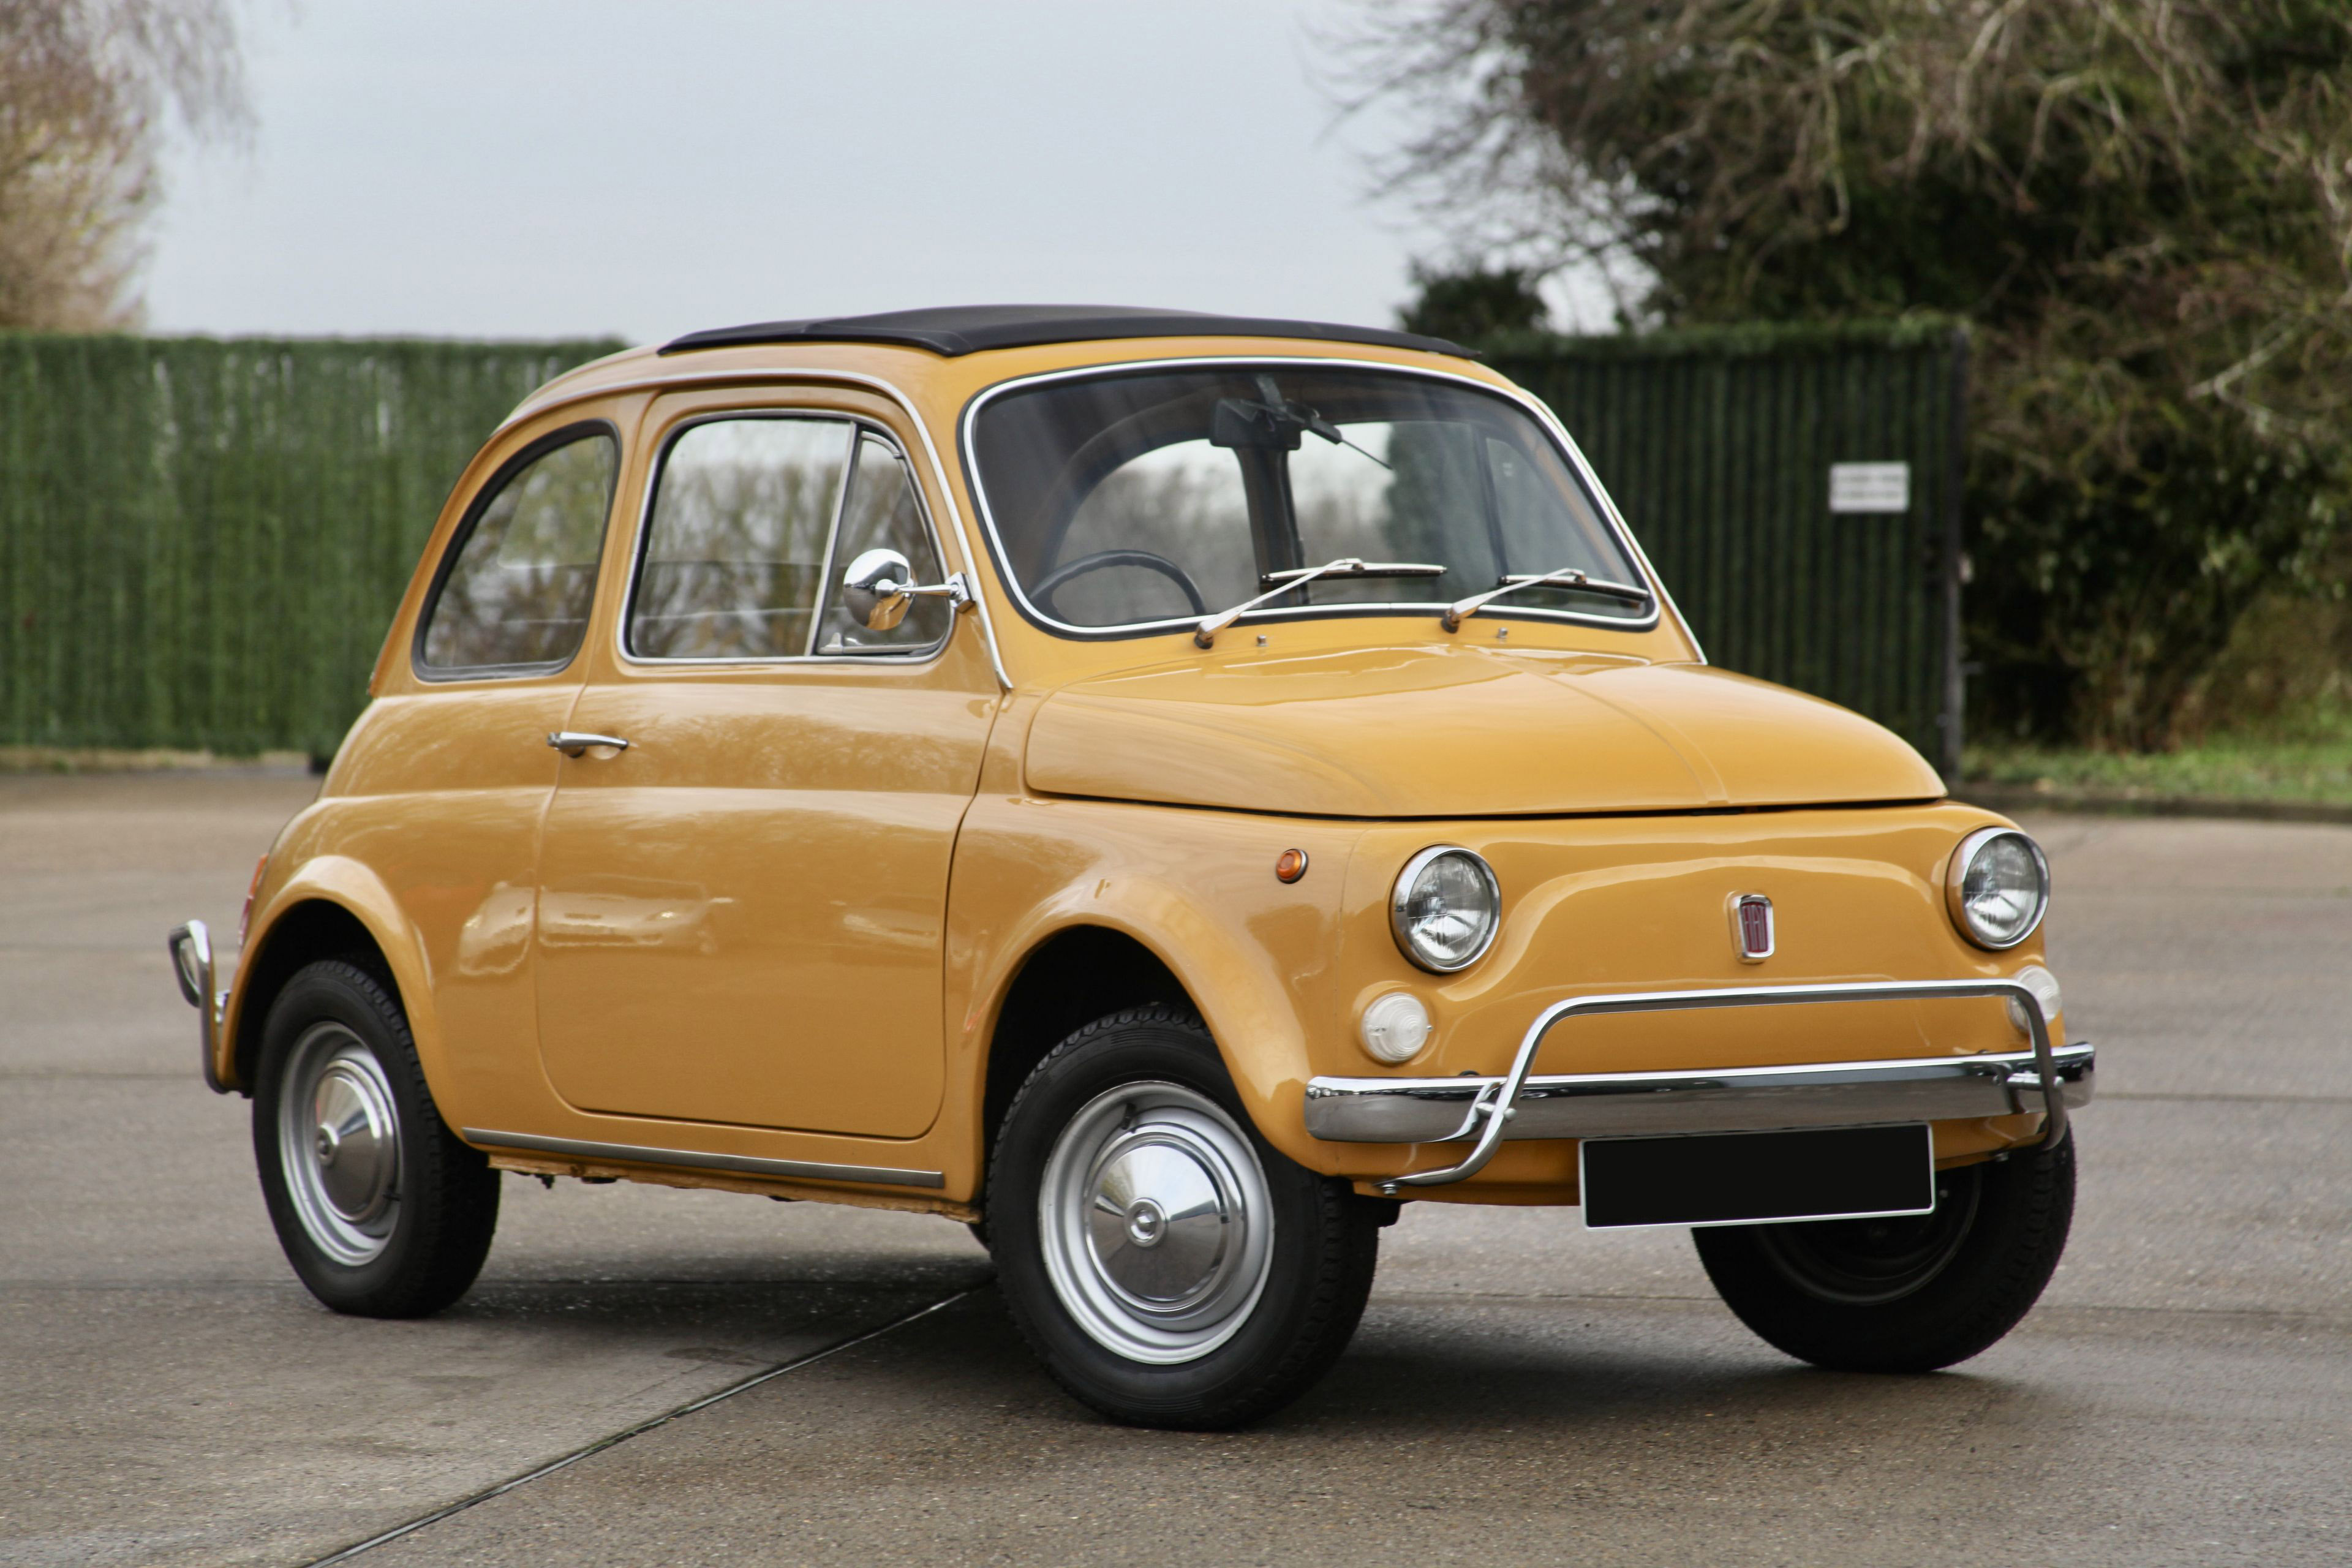 Car & Classic: Fiat is the best-selling brand among vintage cars